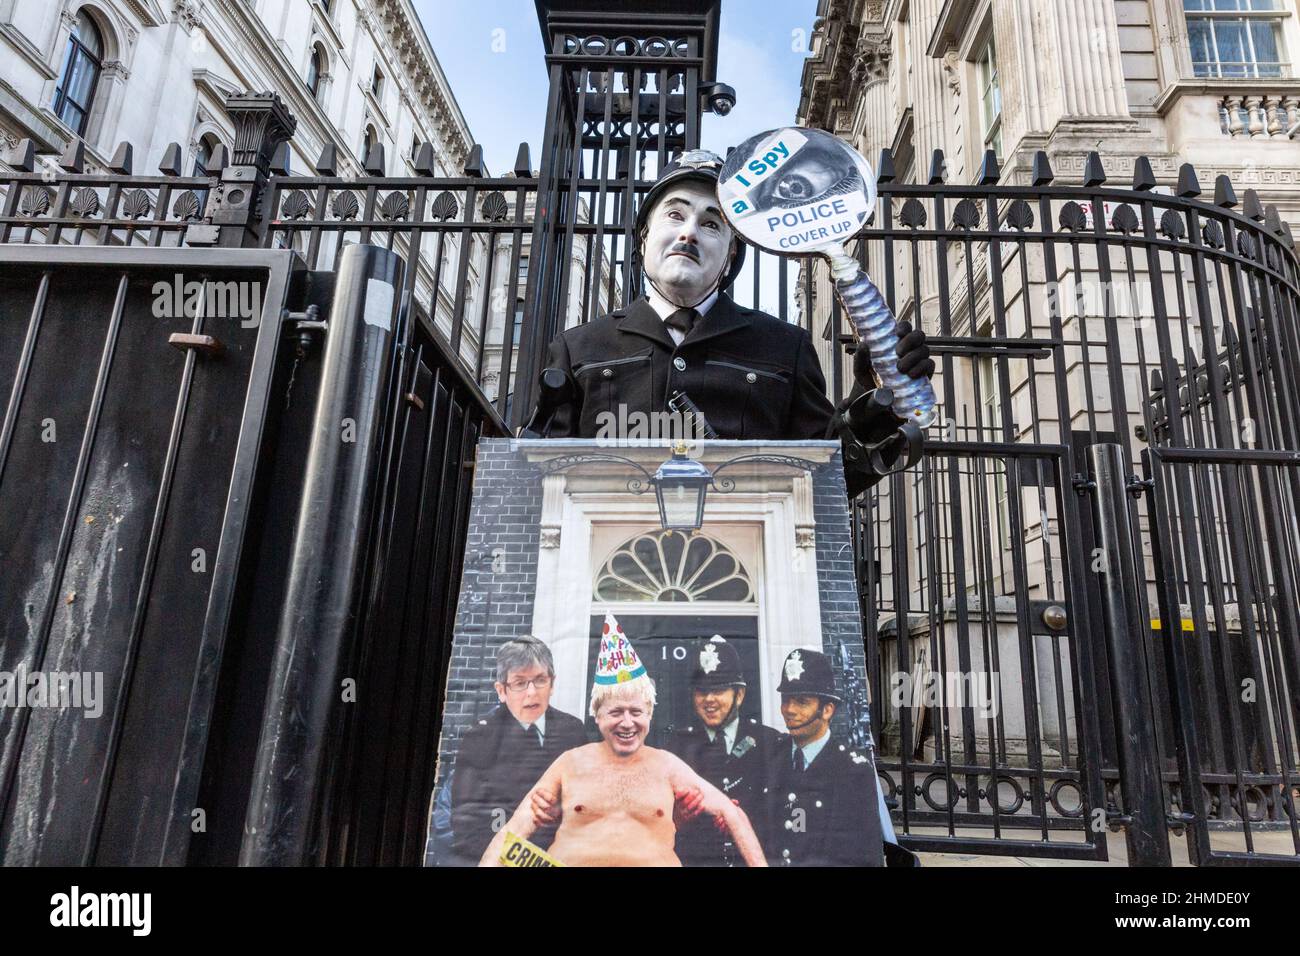 London, UK. 09th Feb, 2022. A protester in Charlie Chaplin makeup and police uniform outside Downing Street holds up a placard bemoaning a 'police cover up'. Credit: Imageplotter/Alamy Live News Stock Photo